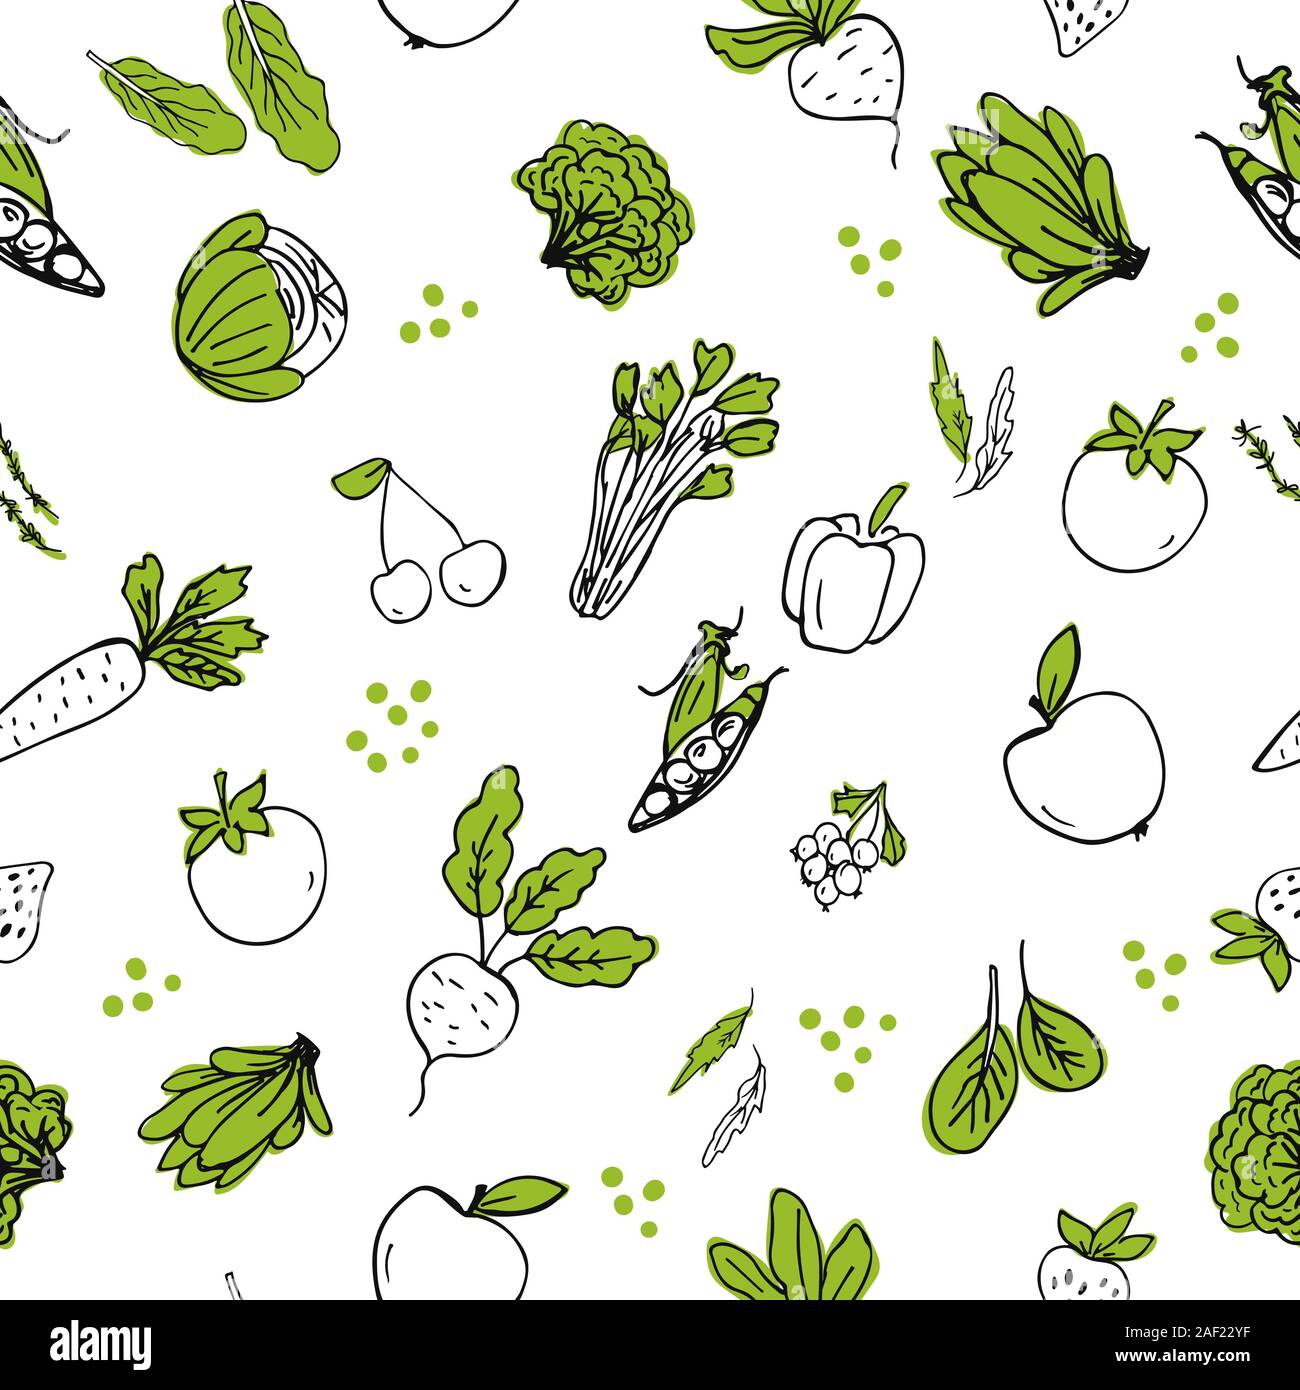 Seasmless pattern with hand drawn vegetables Stock Vector